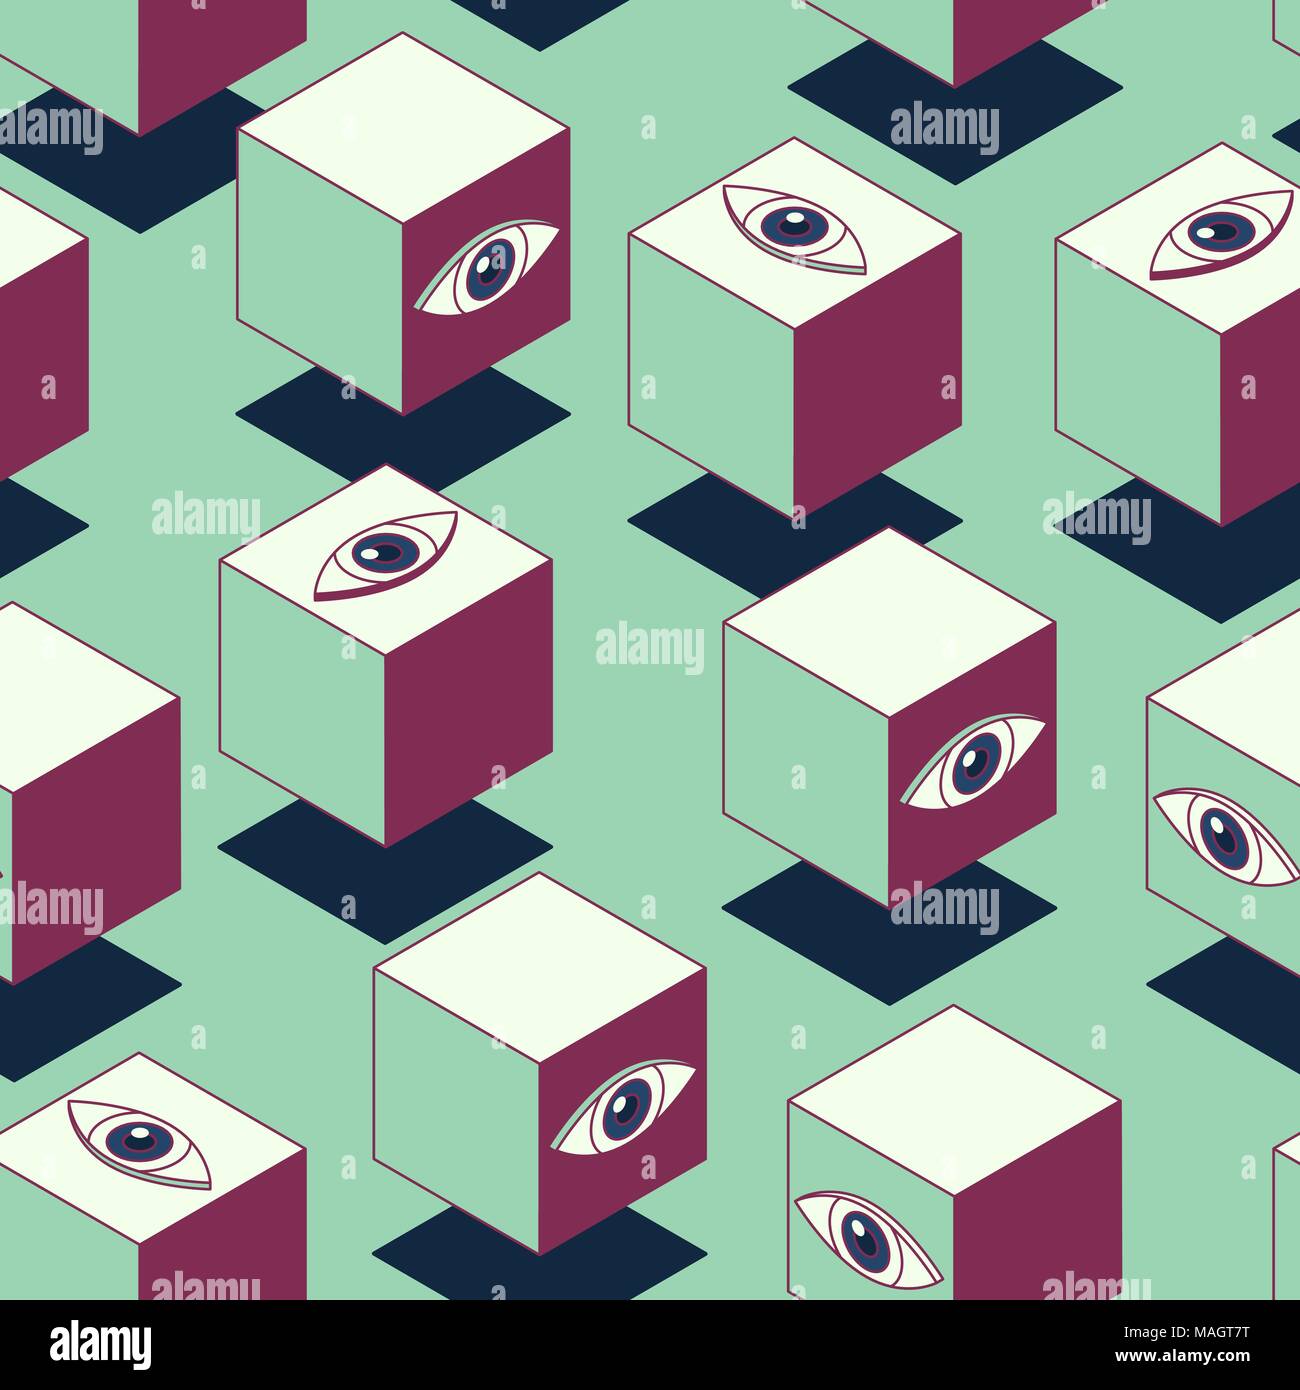 Abstract cubes with eyes. Seamless pattern. Clipping mask used. Stock Vector